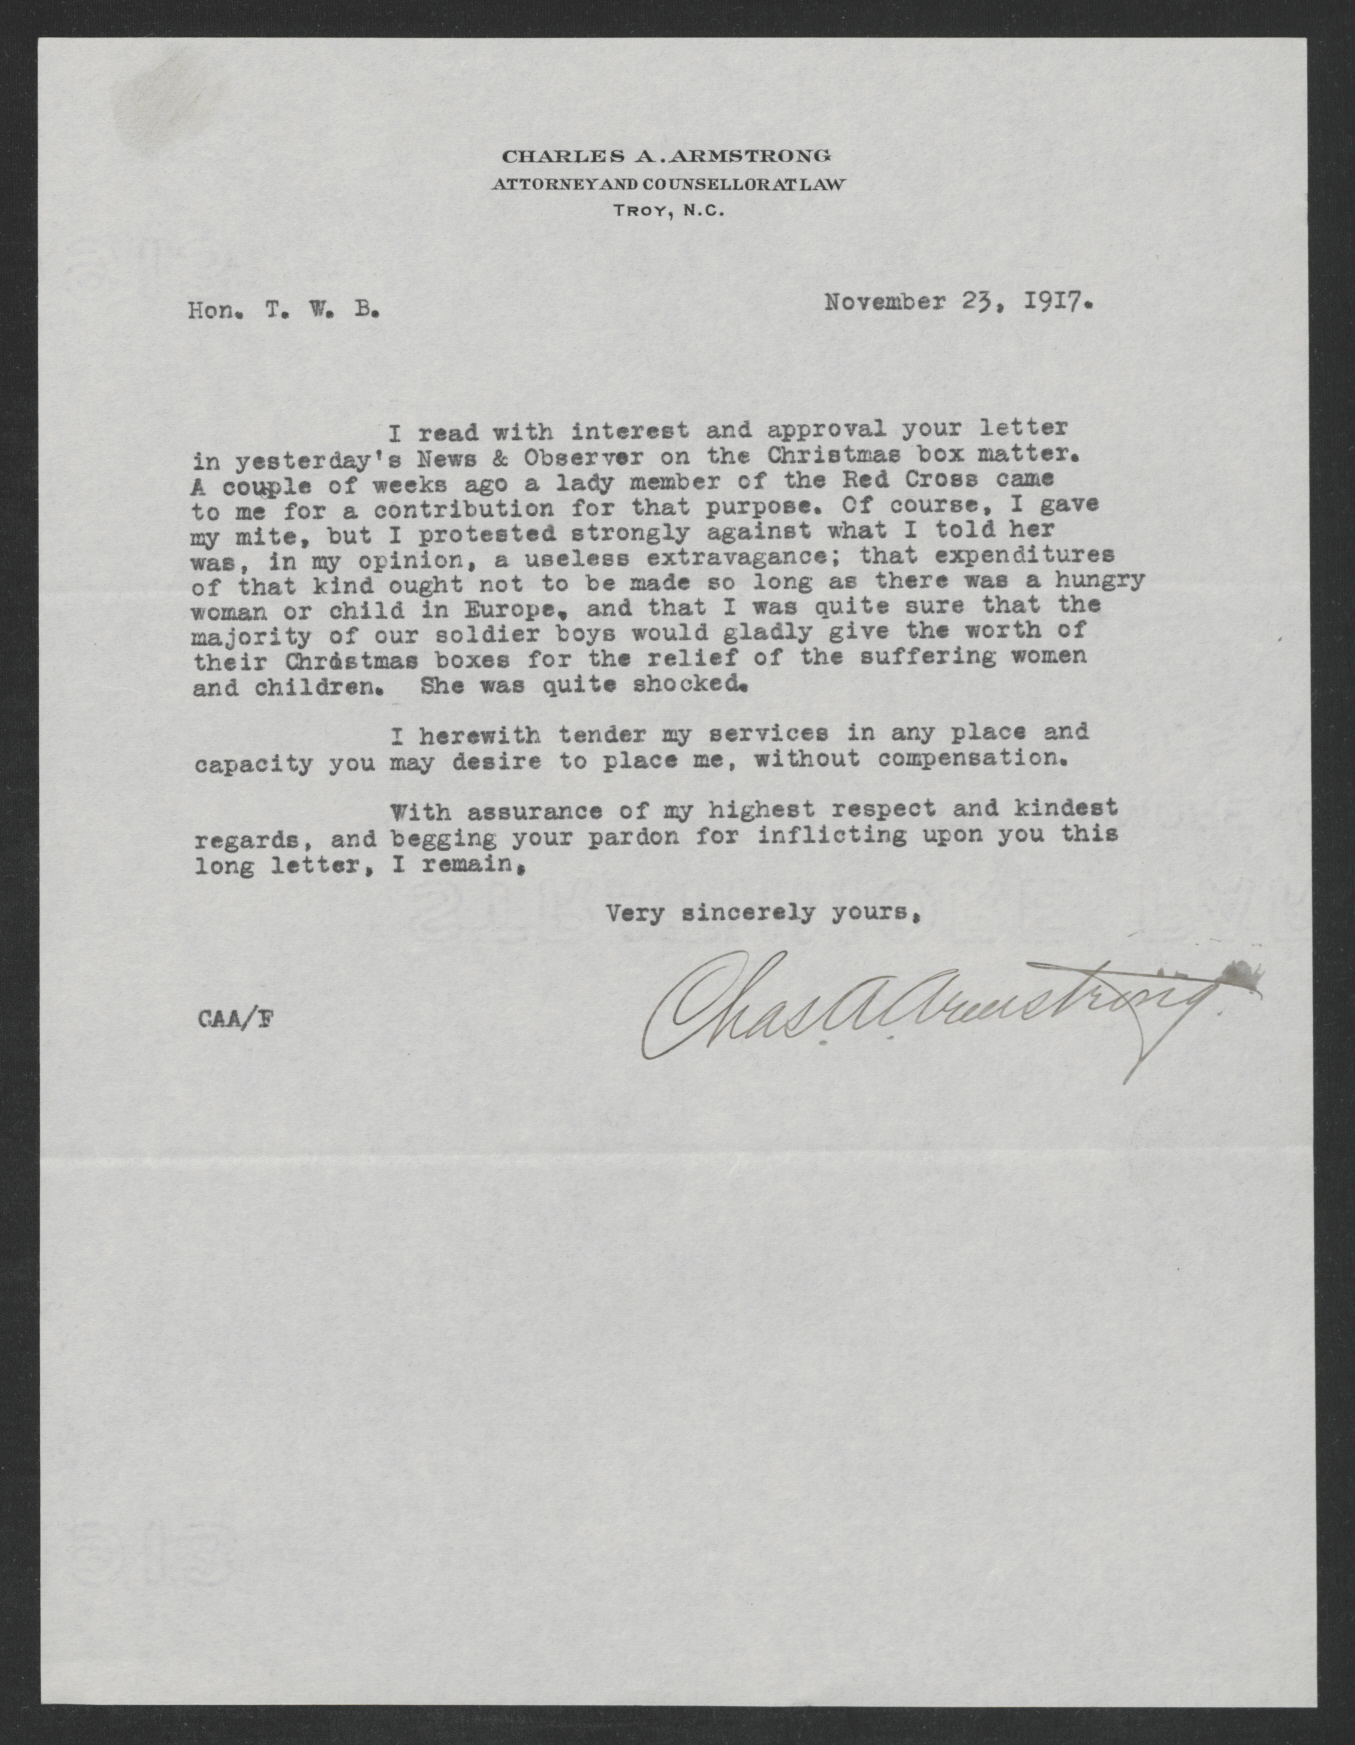 Letter from Charles A. Armstrong to Thomas W. Bickett, November 23, 1917, page 2